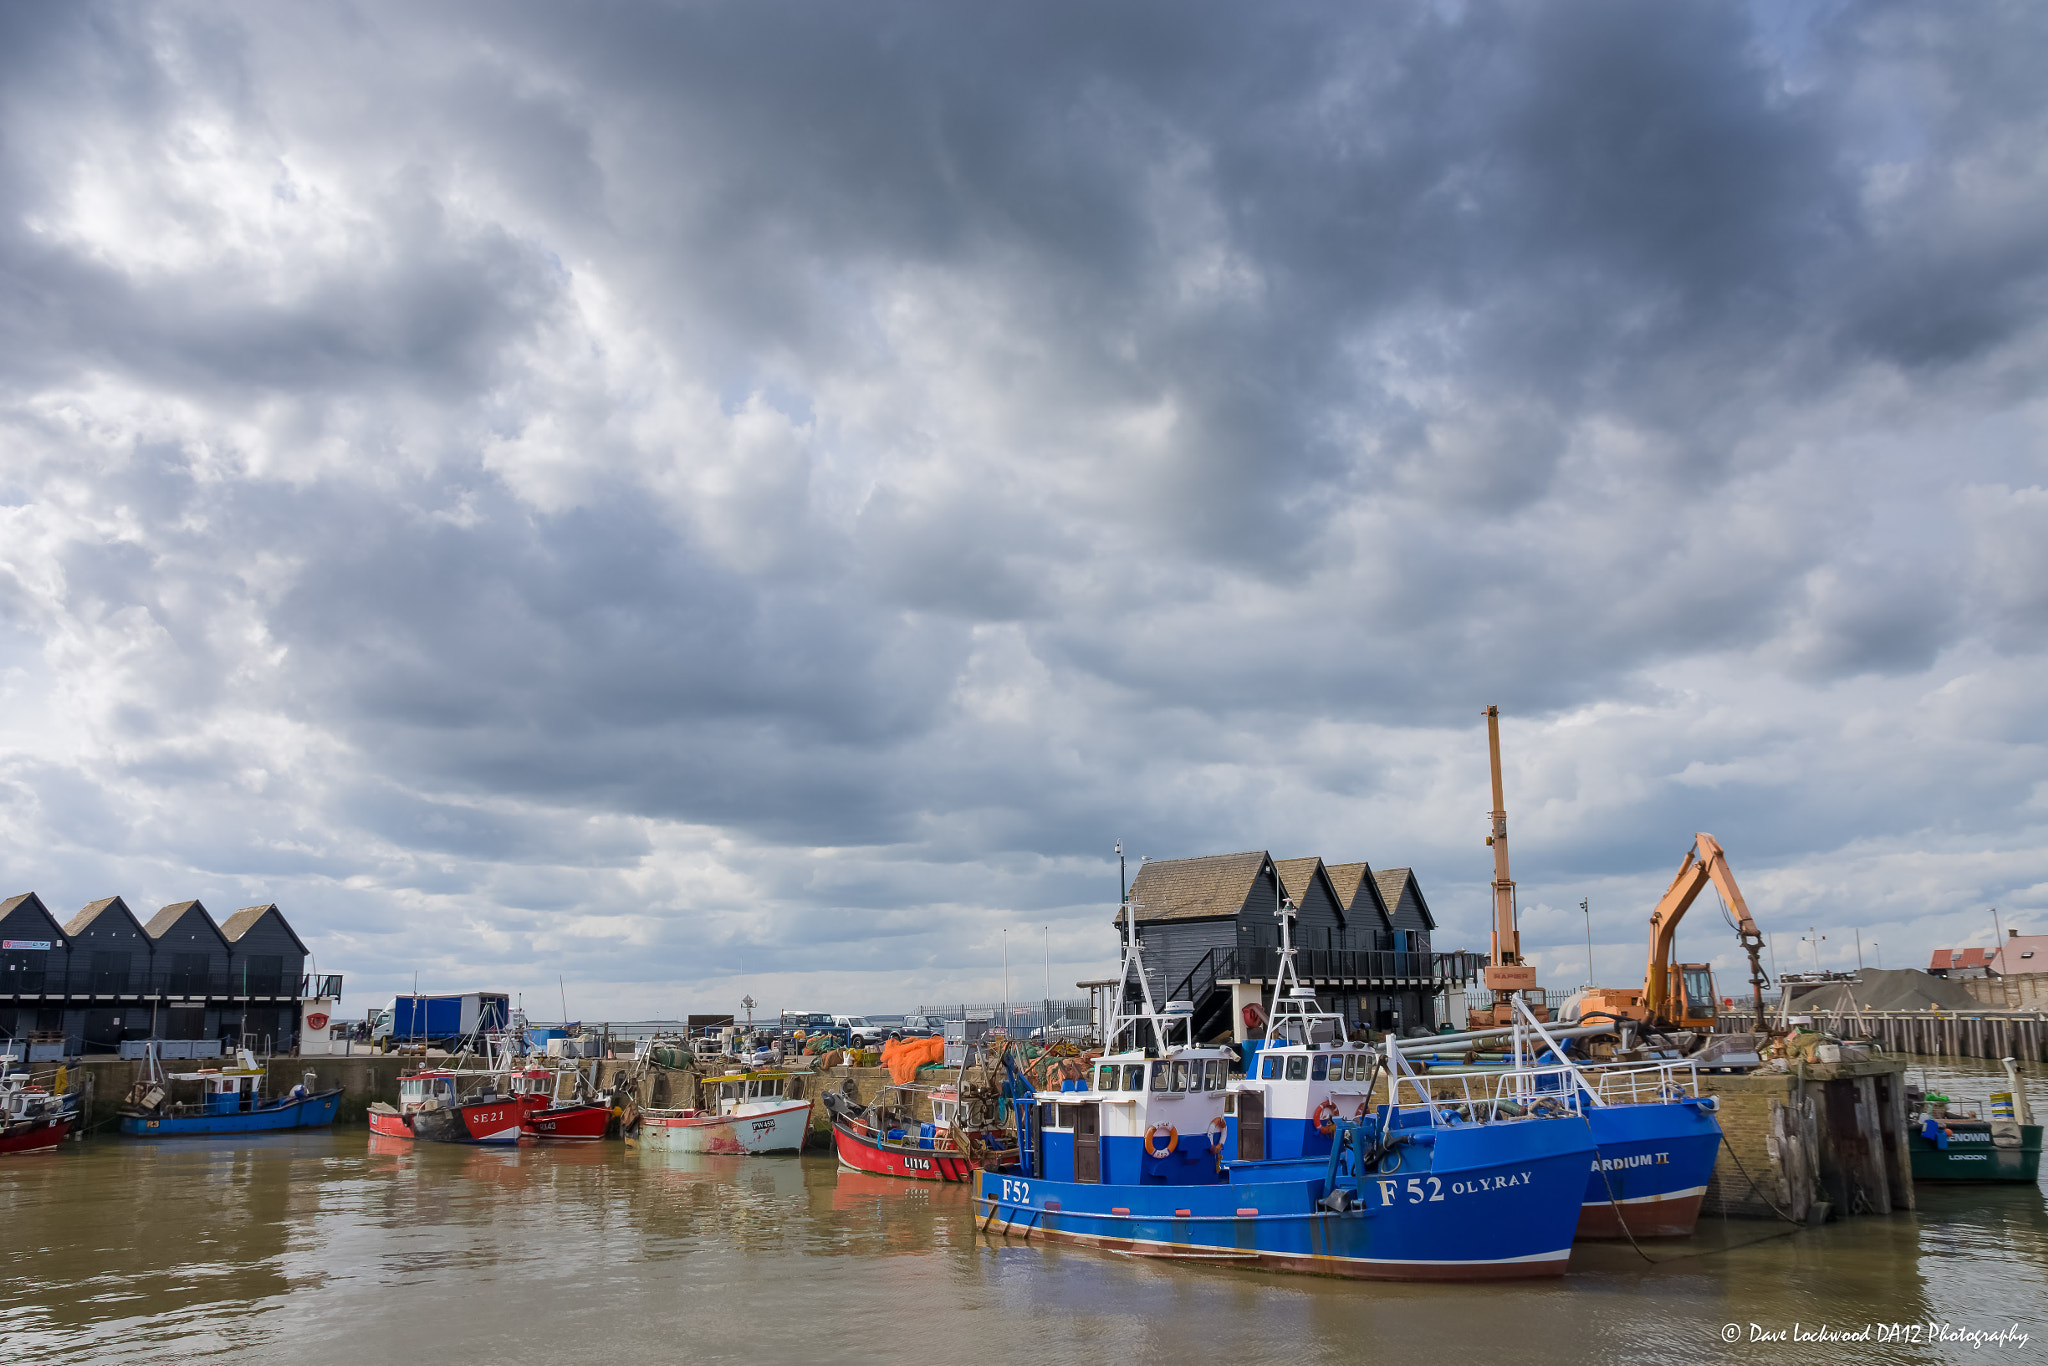 Nikon D7200 + Sigma 17-70mm F2.8-4 DC Macro OS HSM | C sample photo. Whitstable harbour on a cloudy afternoon photography